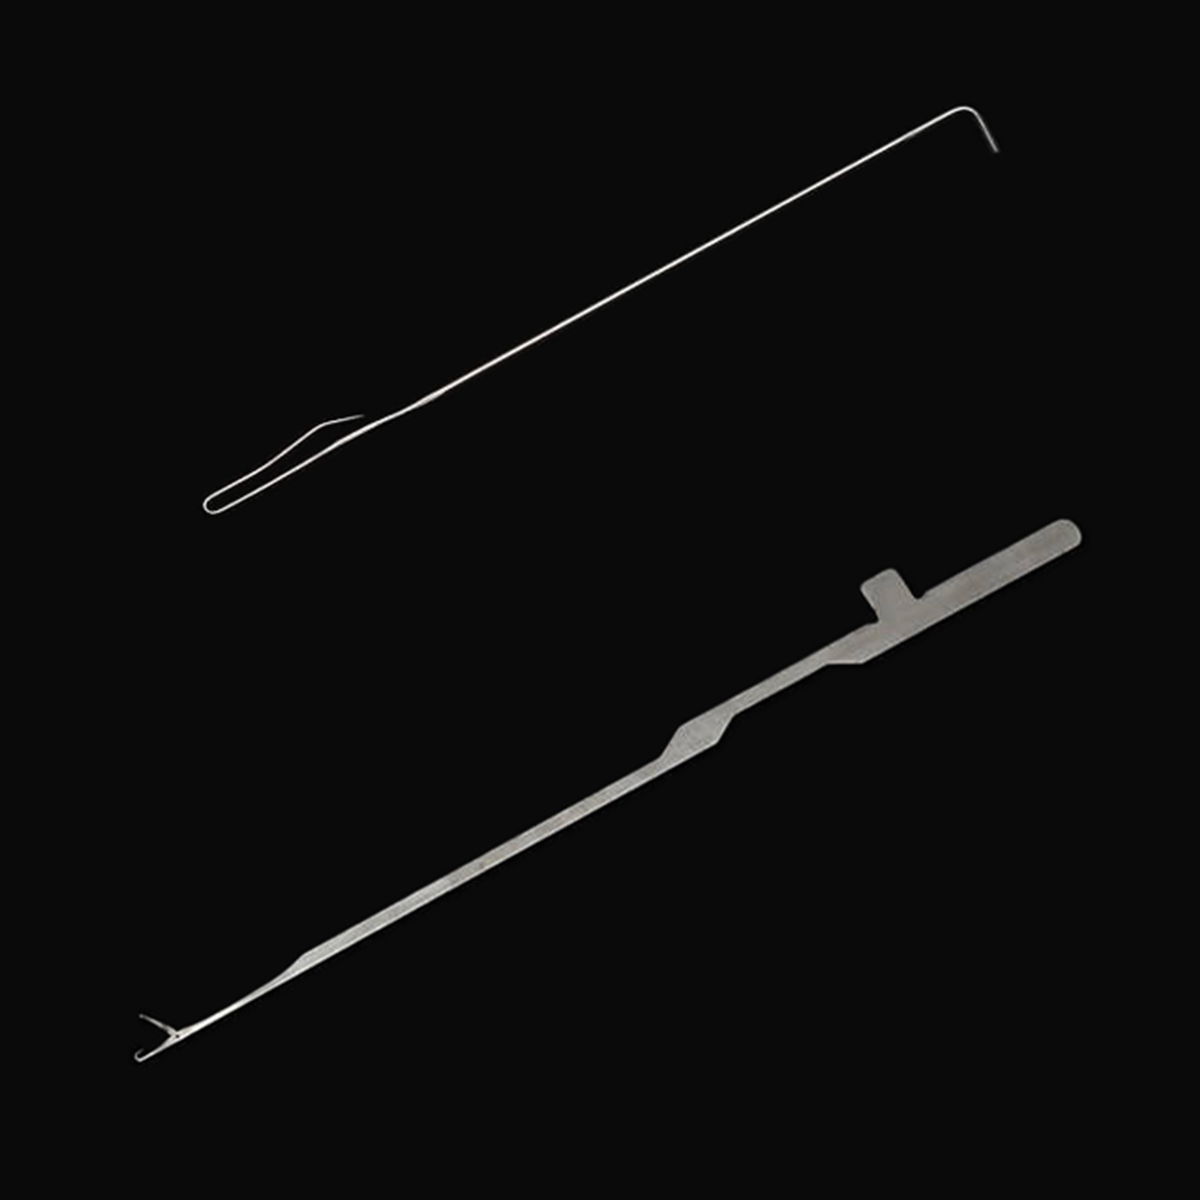 A comparison of the spring bearded needles used by loopwheelers versus a latch needle used in high-speed circular knitting.